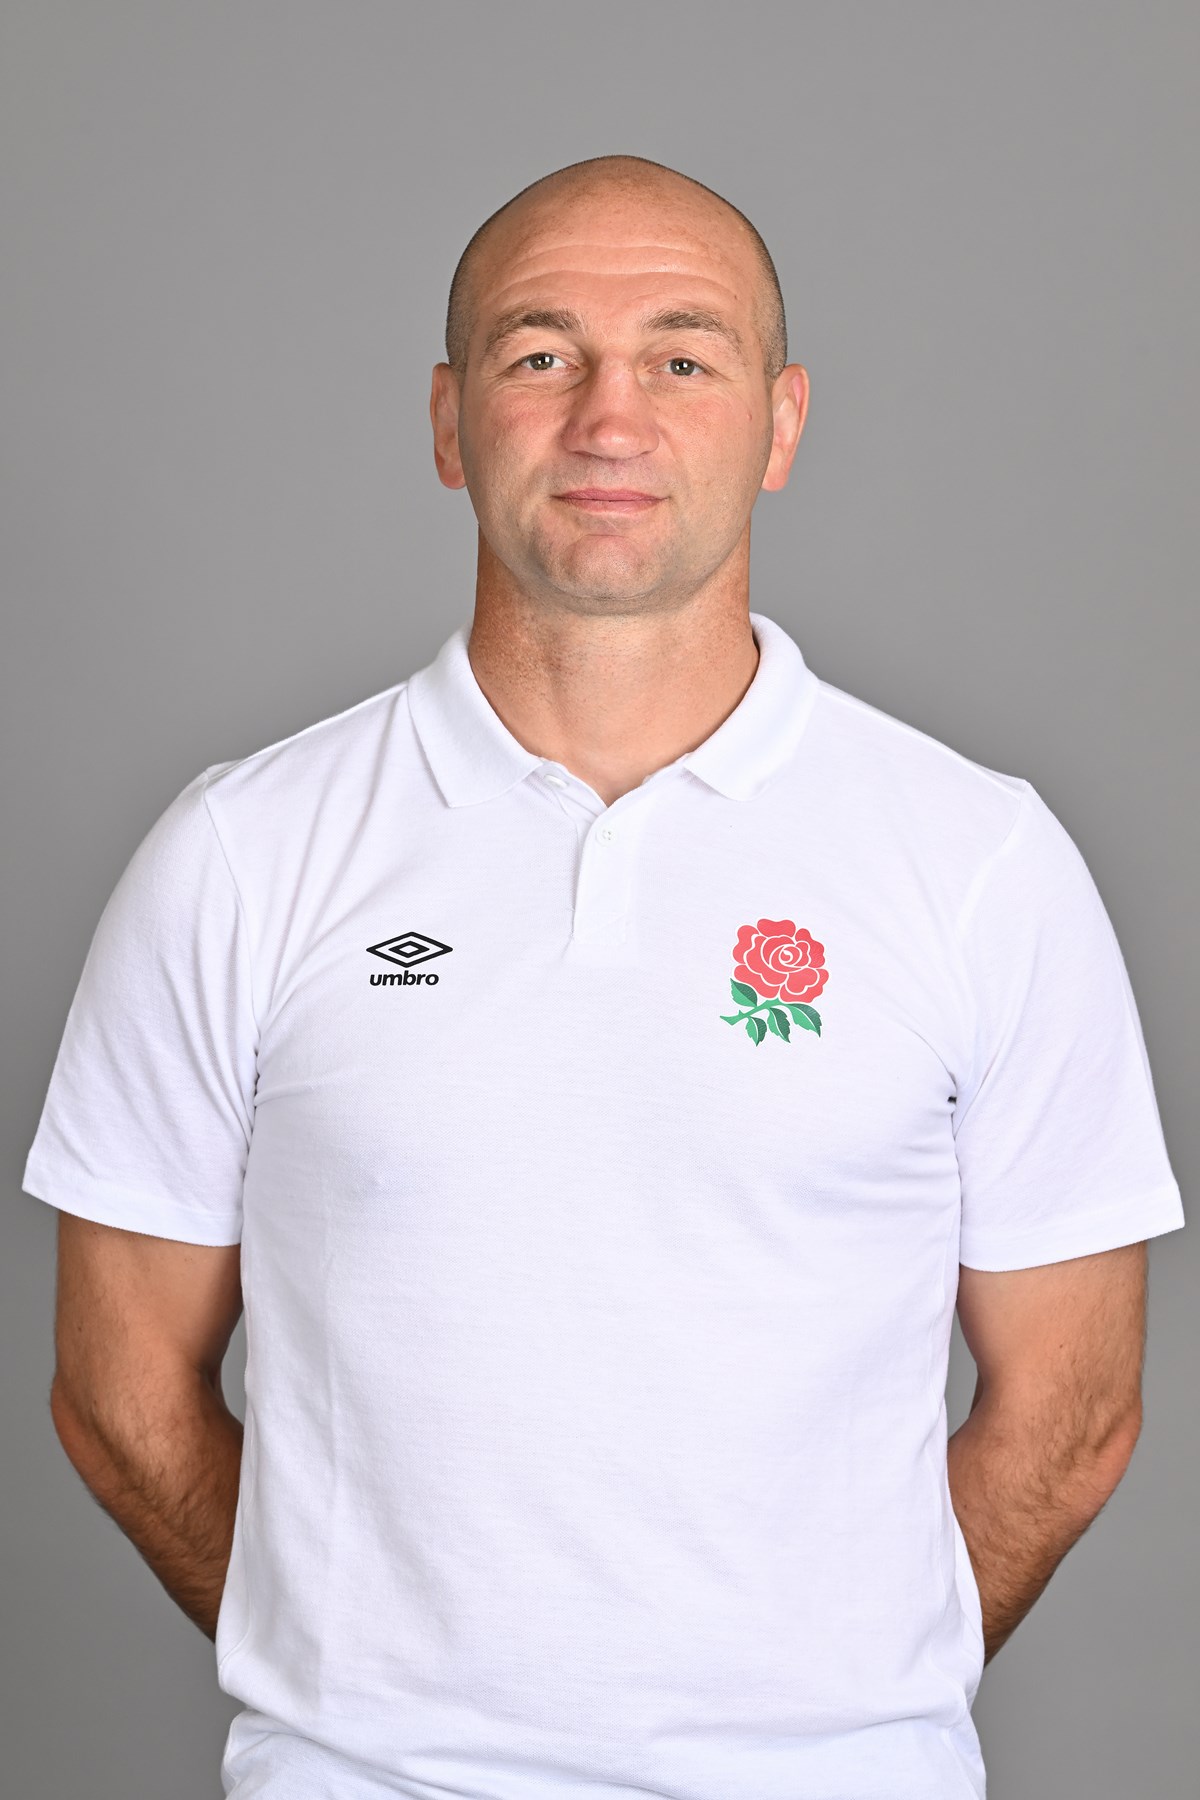 England Rugby's Stephen Borthwick, who is also an Honorary Fellow of the University of Cumbria
Picture: England Rugby/GettyImages-1603560510